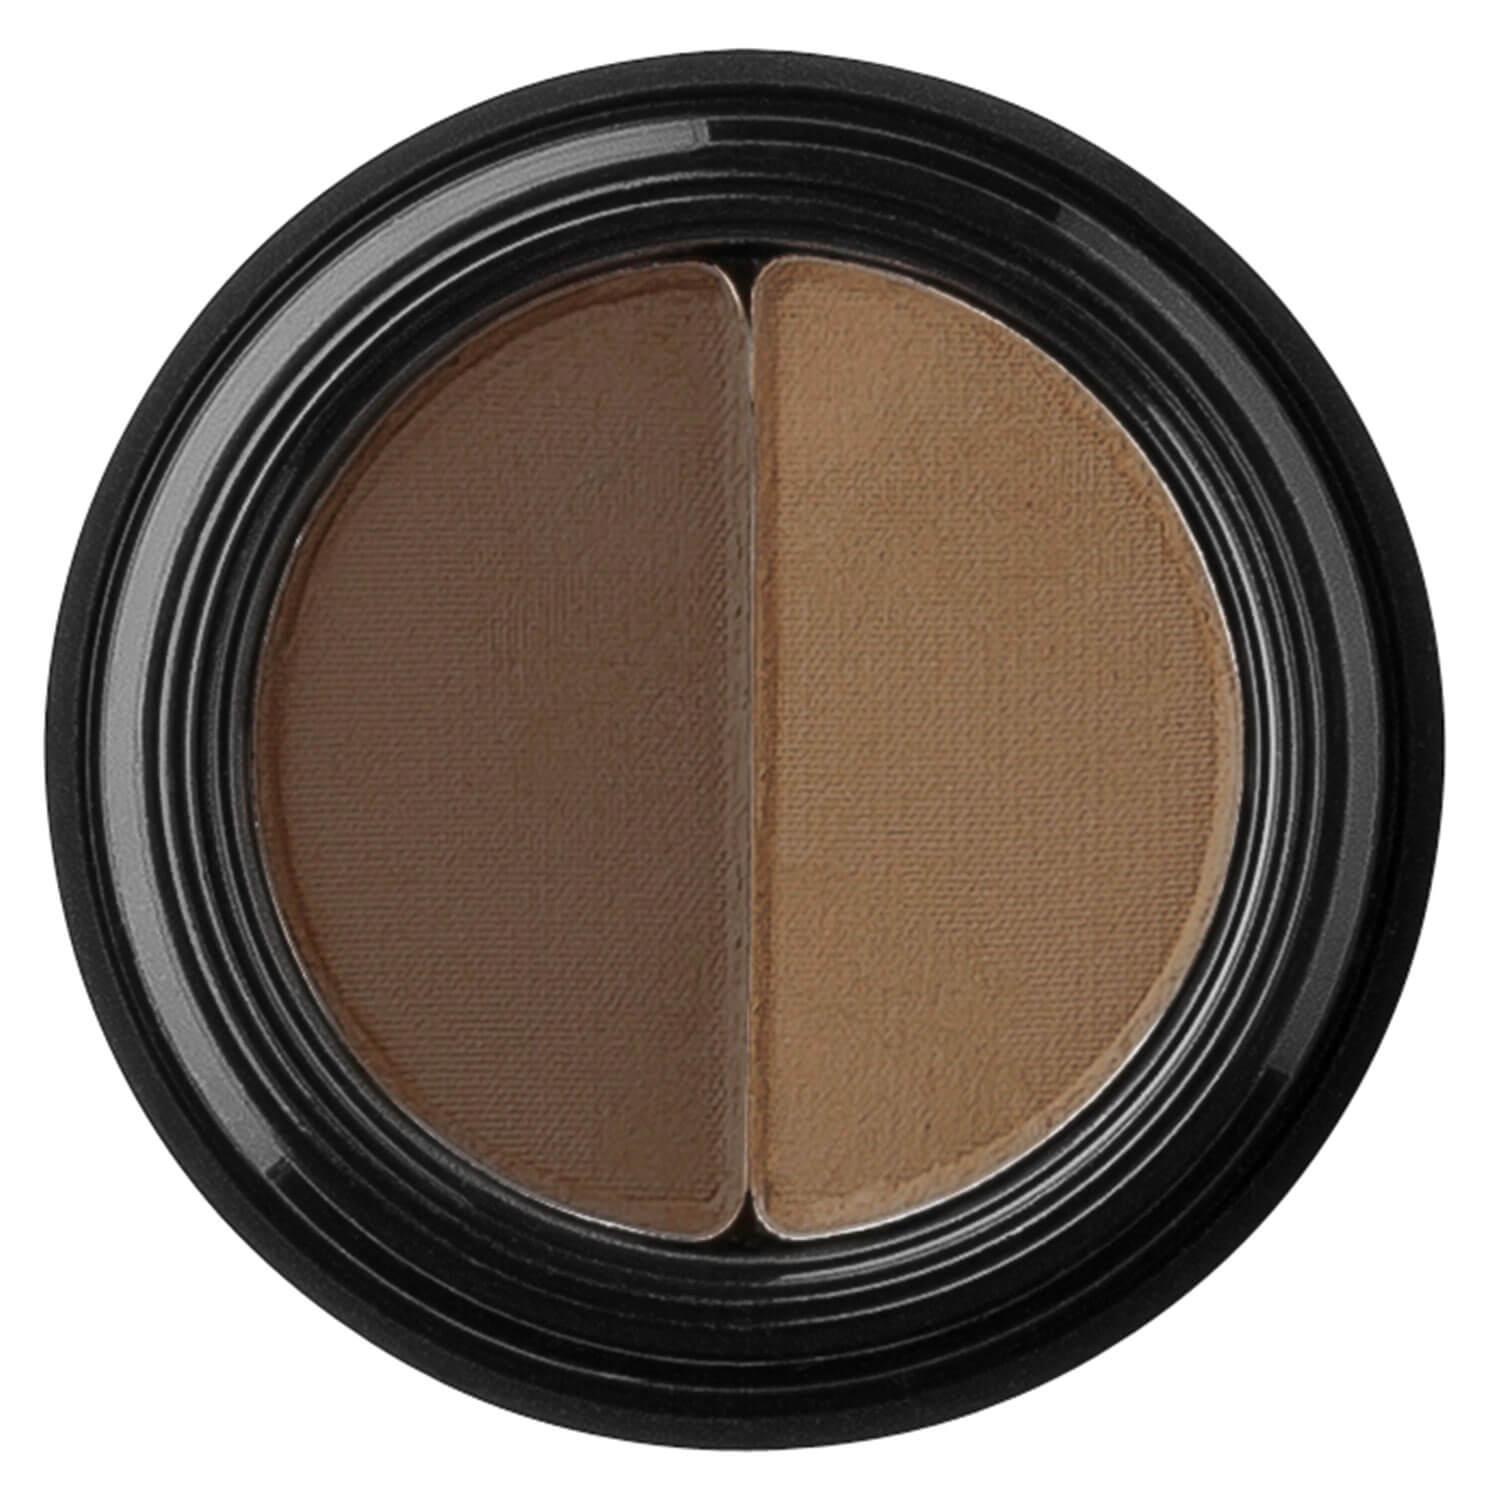 Glo Skin Beauty Brows - Brow Powder Duo Brown